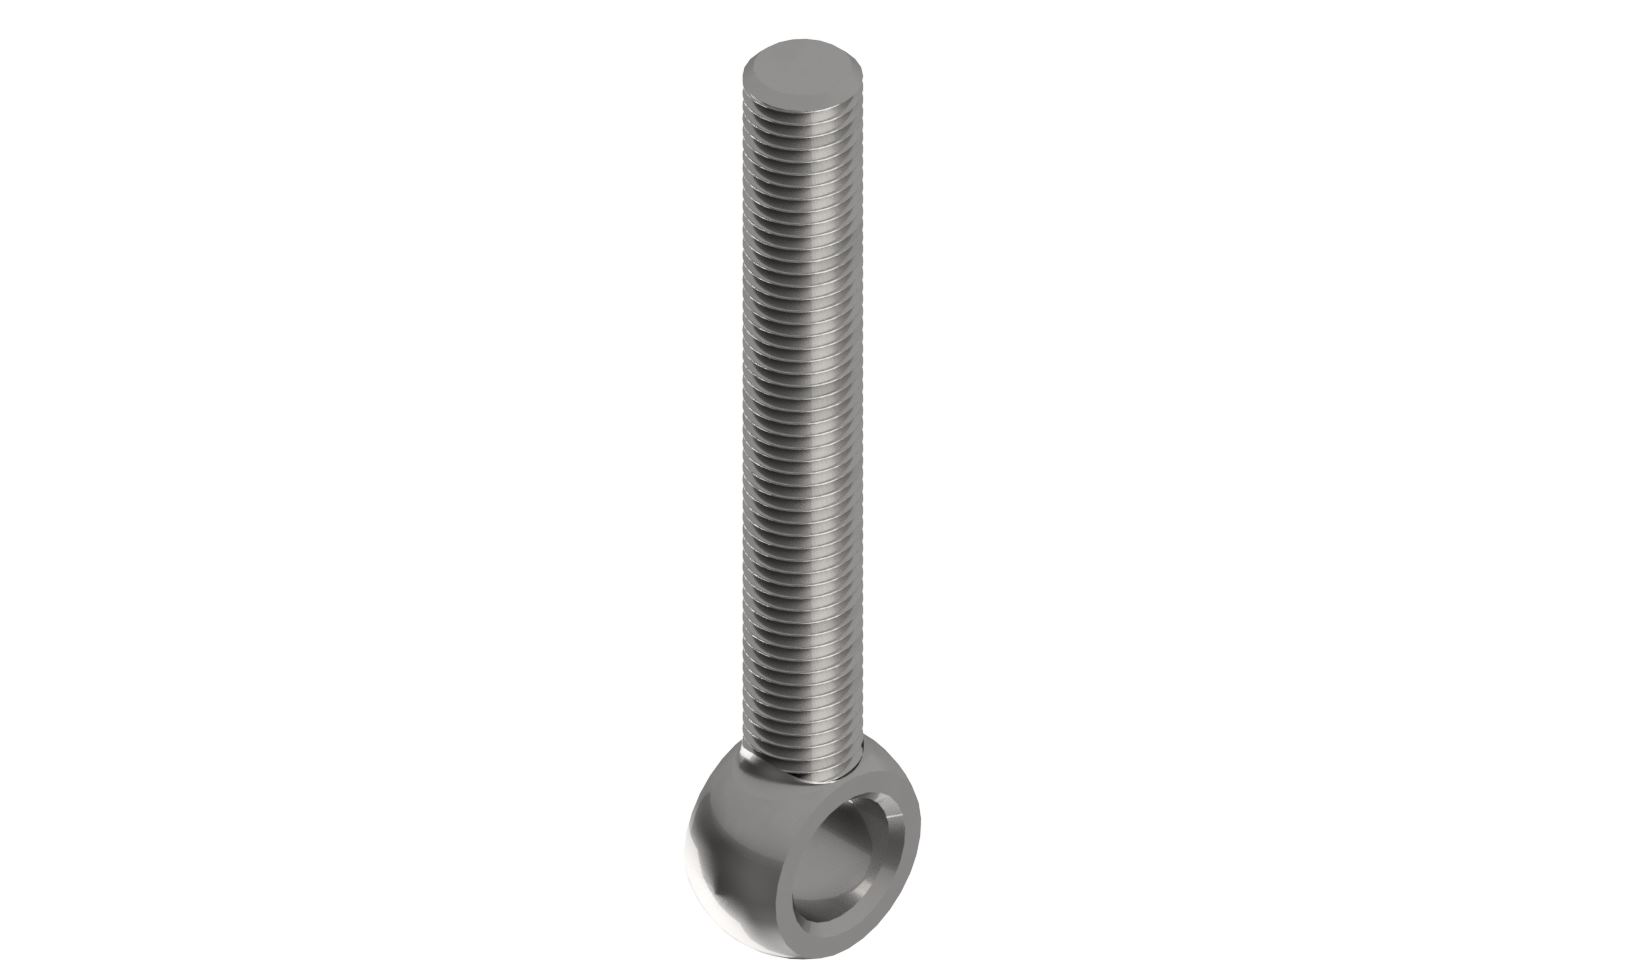 Looking for eye bolts? Multiple versions & sizes at Rob Snel